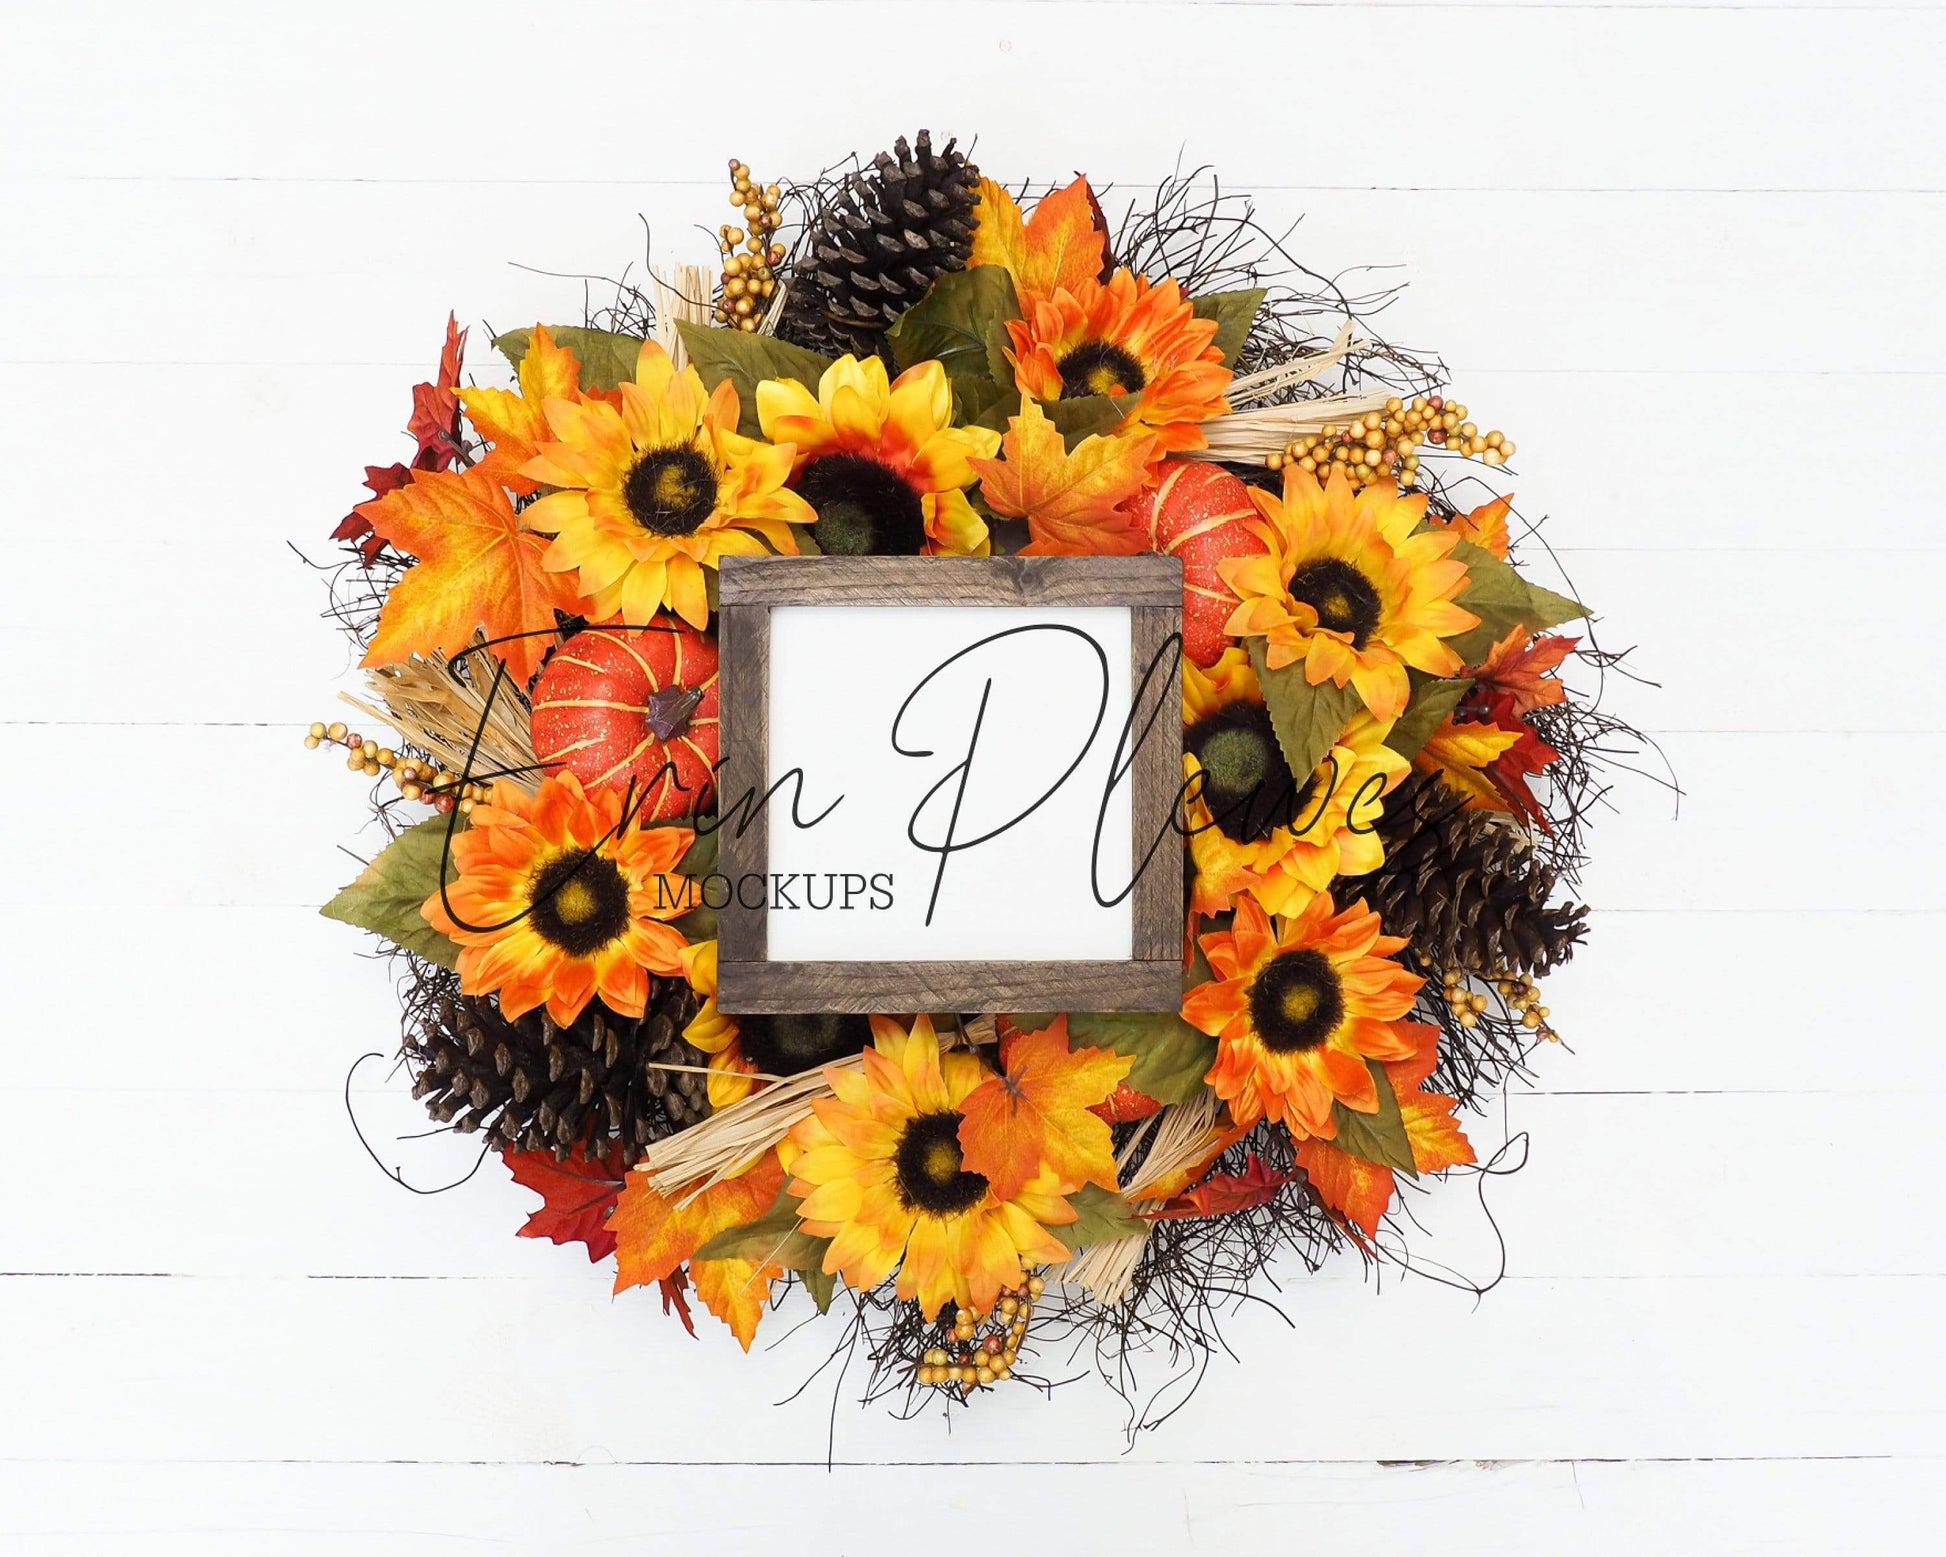 Erin Plewes Mockups Wood Sign Mockup 6x6, Rustic Wood Frame Mock-up, Fall Sign Flatlay with Pumpkins and Sunflowers, Farmhouse Style Mock Up